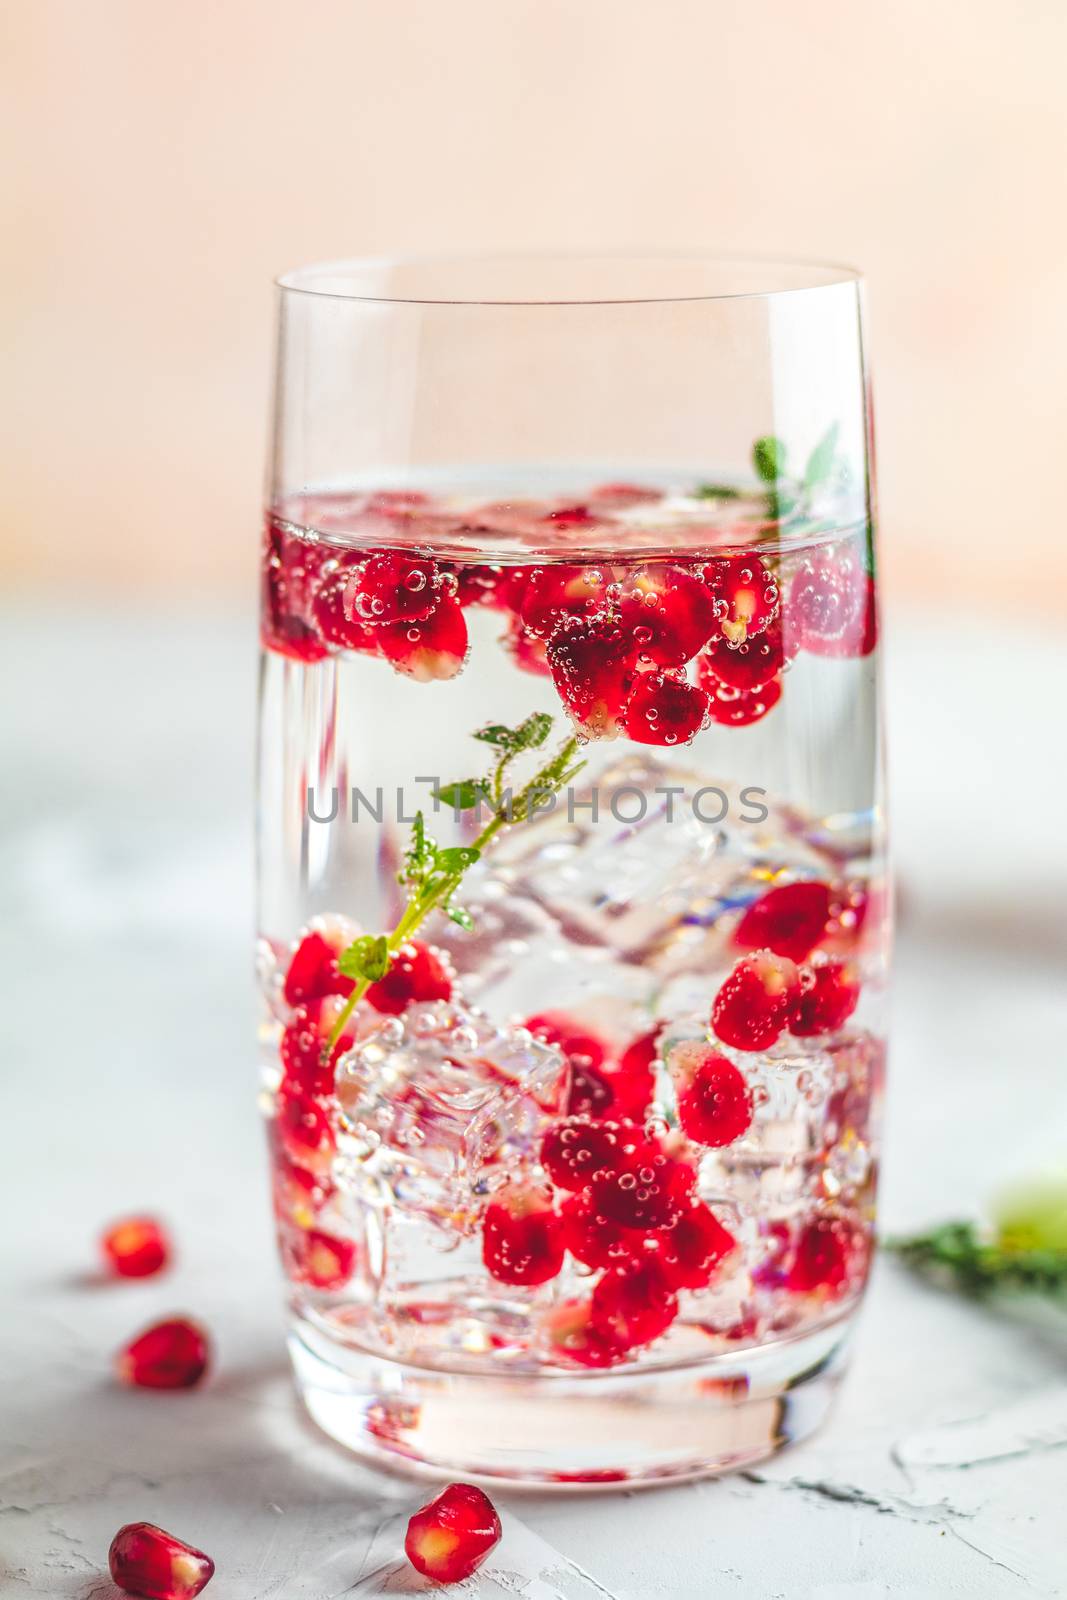 Gin and tonic pomegranate cocktail or detox water with ice by ArtSvitlyna